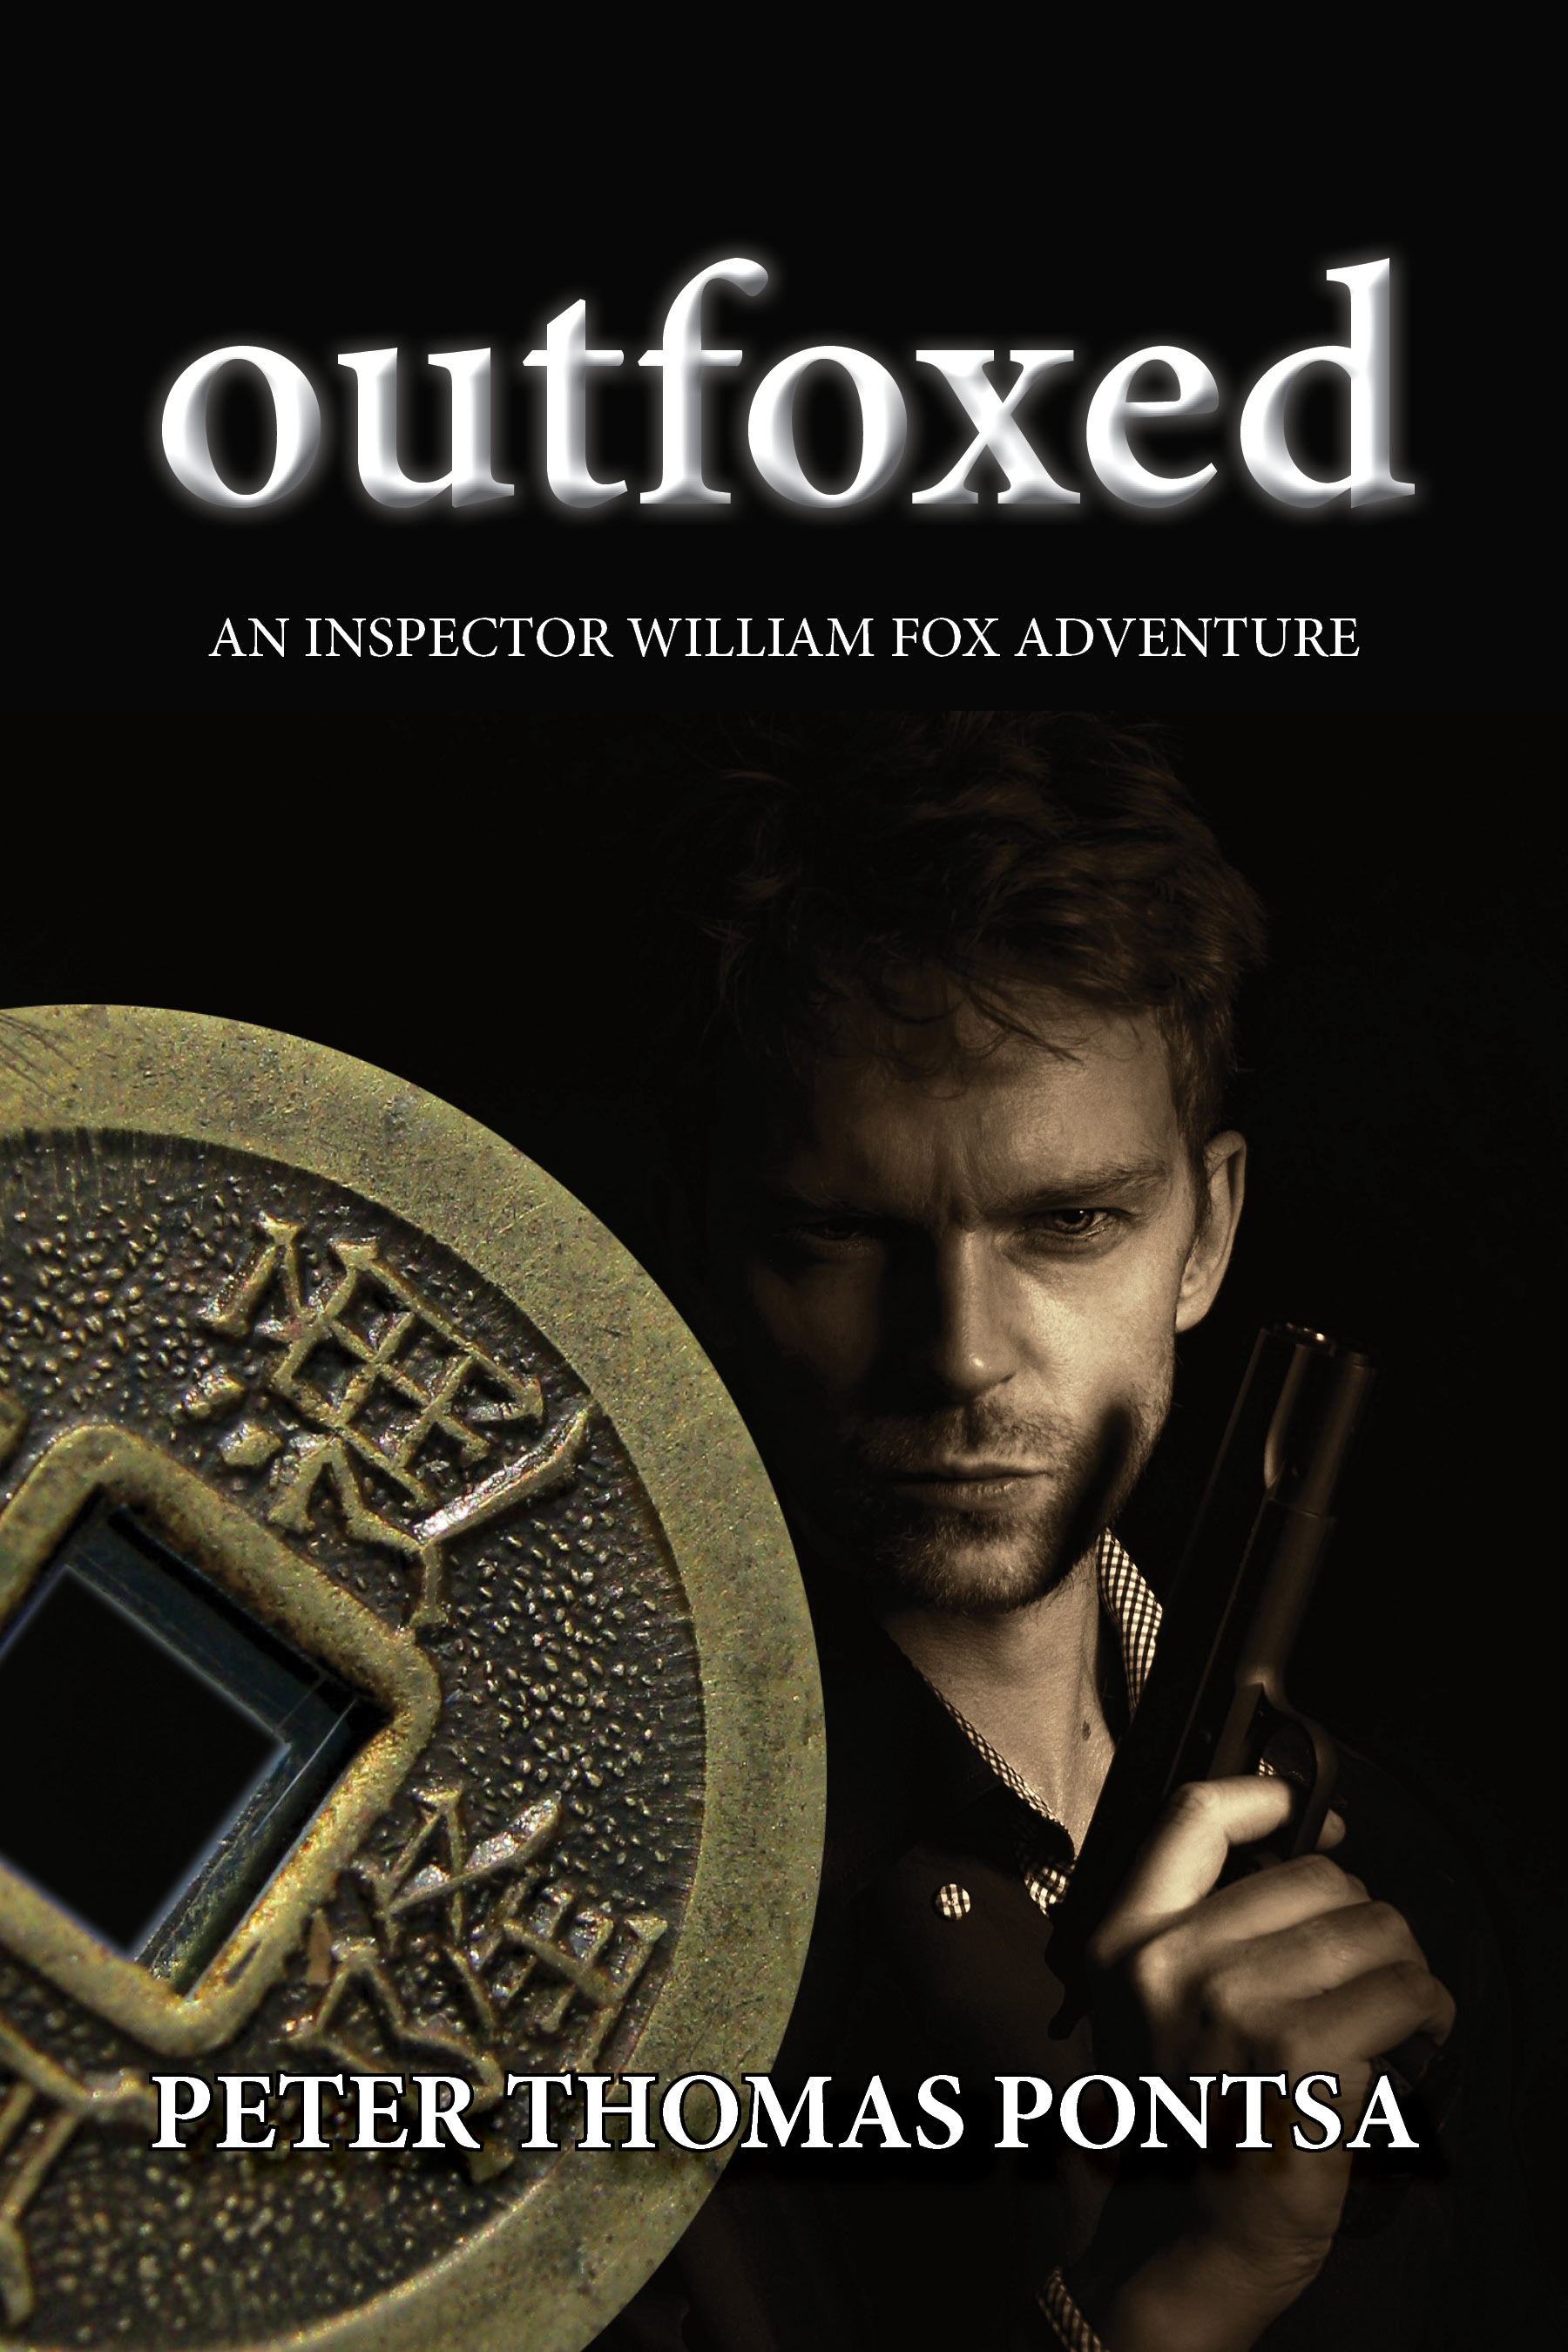 Outfoxed – An Inspector William Fox Adventure